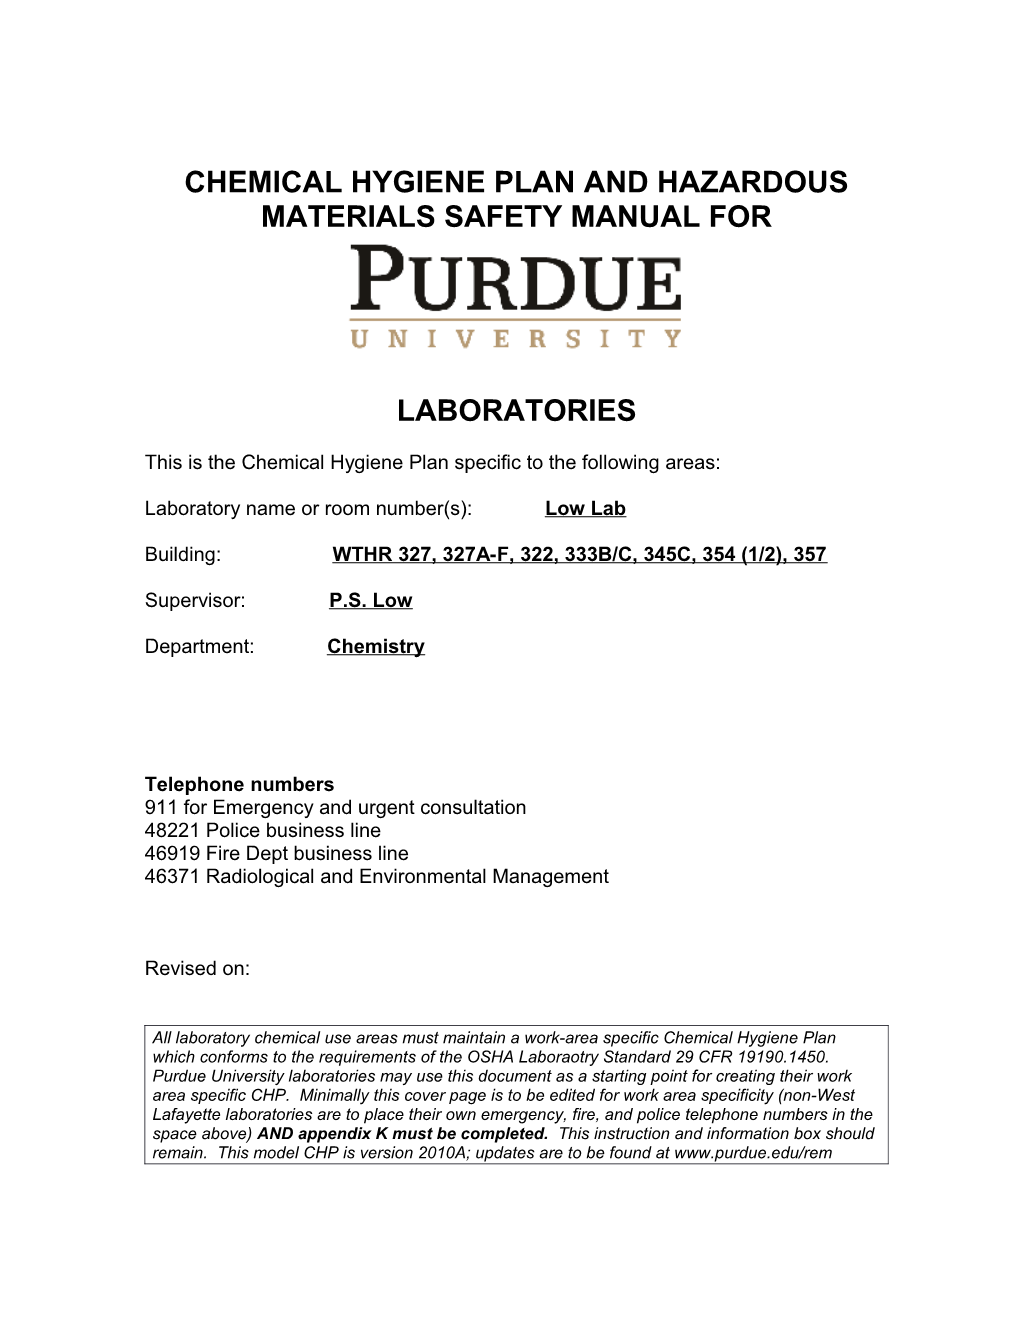 Chemical Hygiene Plan and Hazardous Materials Safety Manual For